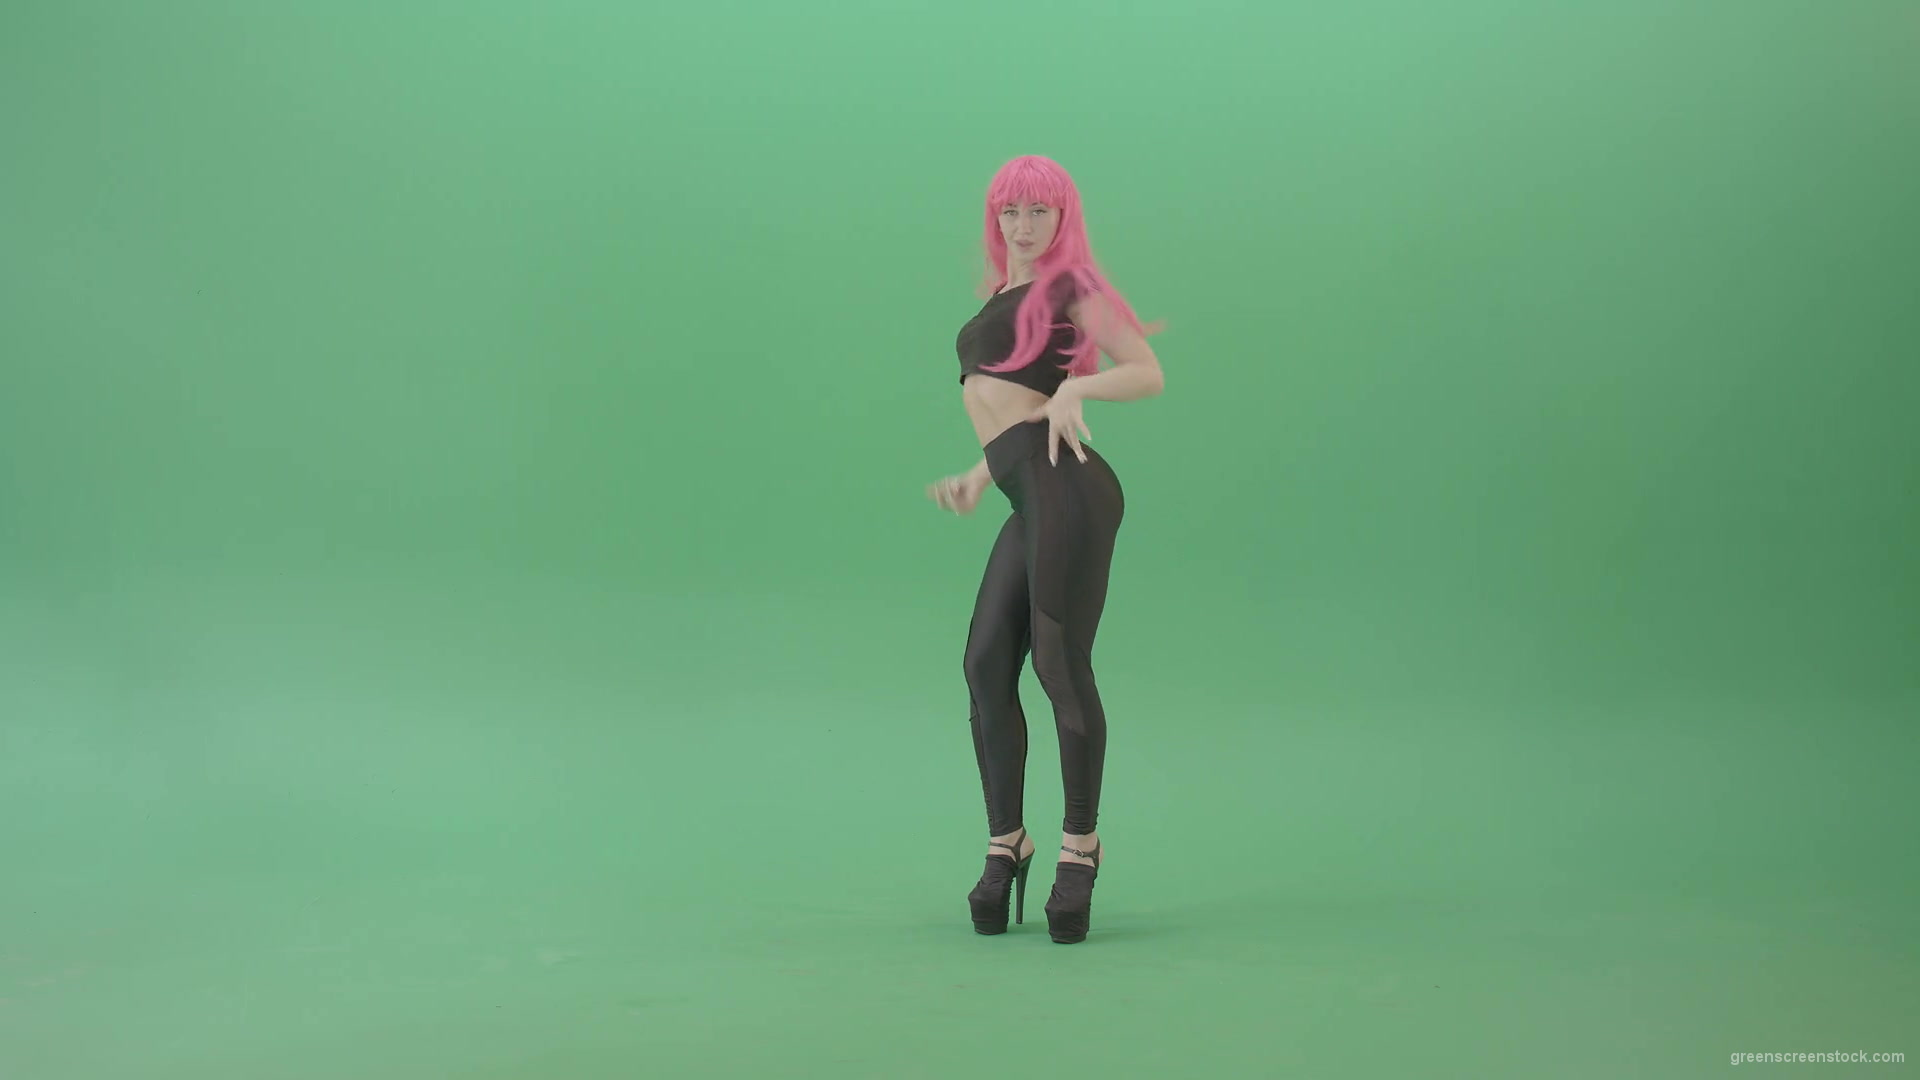 Pink-hair-EMO-sexy-girl-on-green-screen-posing-and-dancing-4K-Video-Footage-1920_009 Green Screen Stock